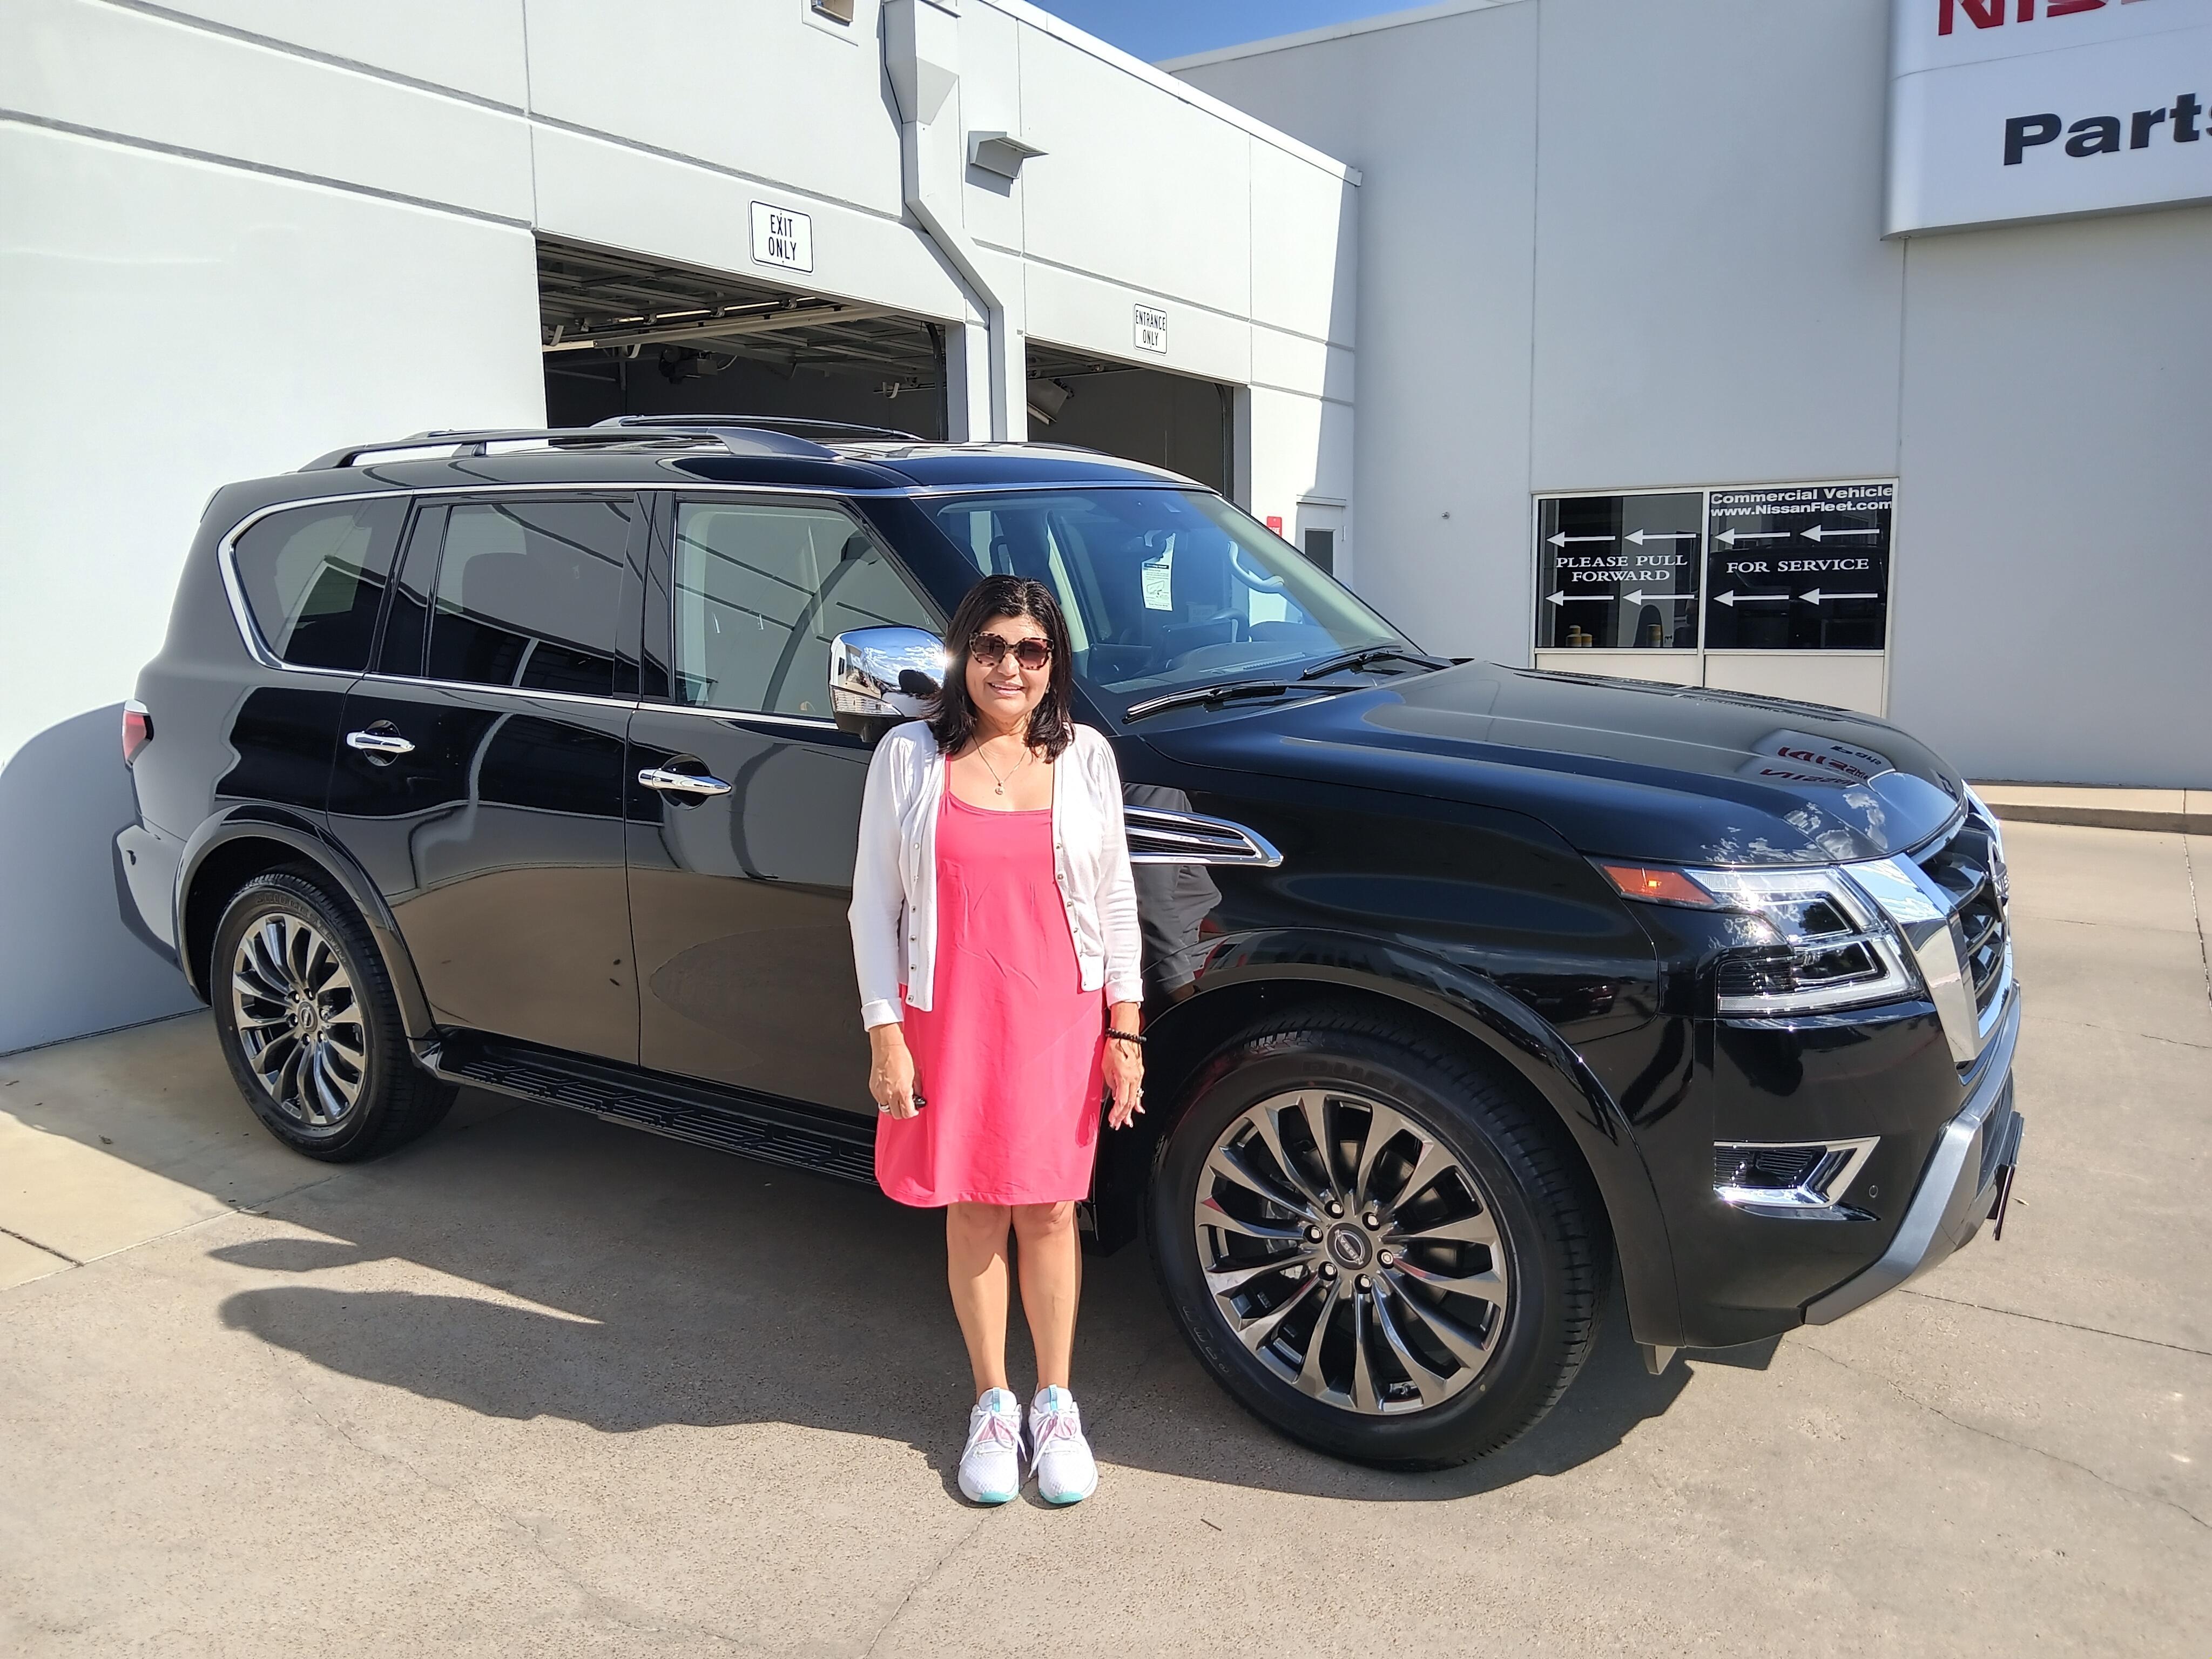 Carmen Coy from Weatherford with her new Armada, helped by Sales Professional Crockett Polich